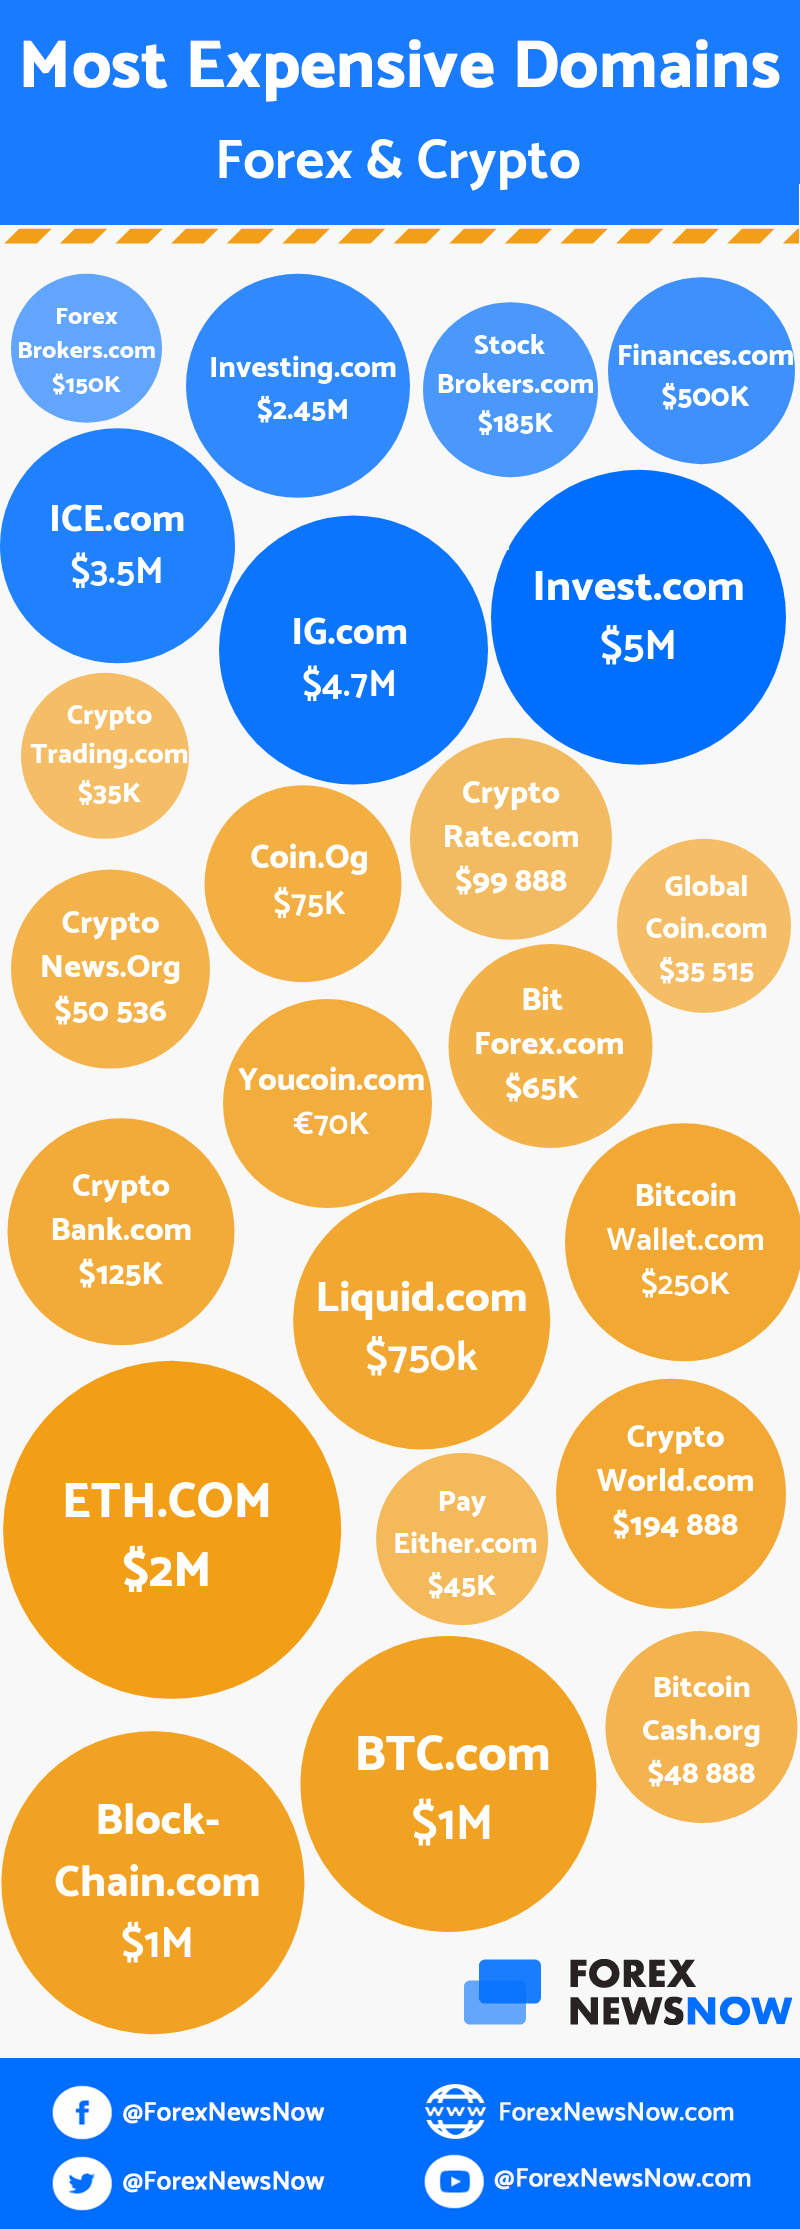 most-expensive-forex-crypto-domains